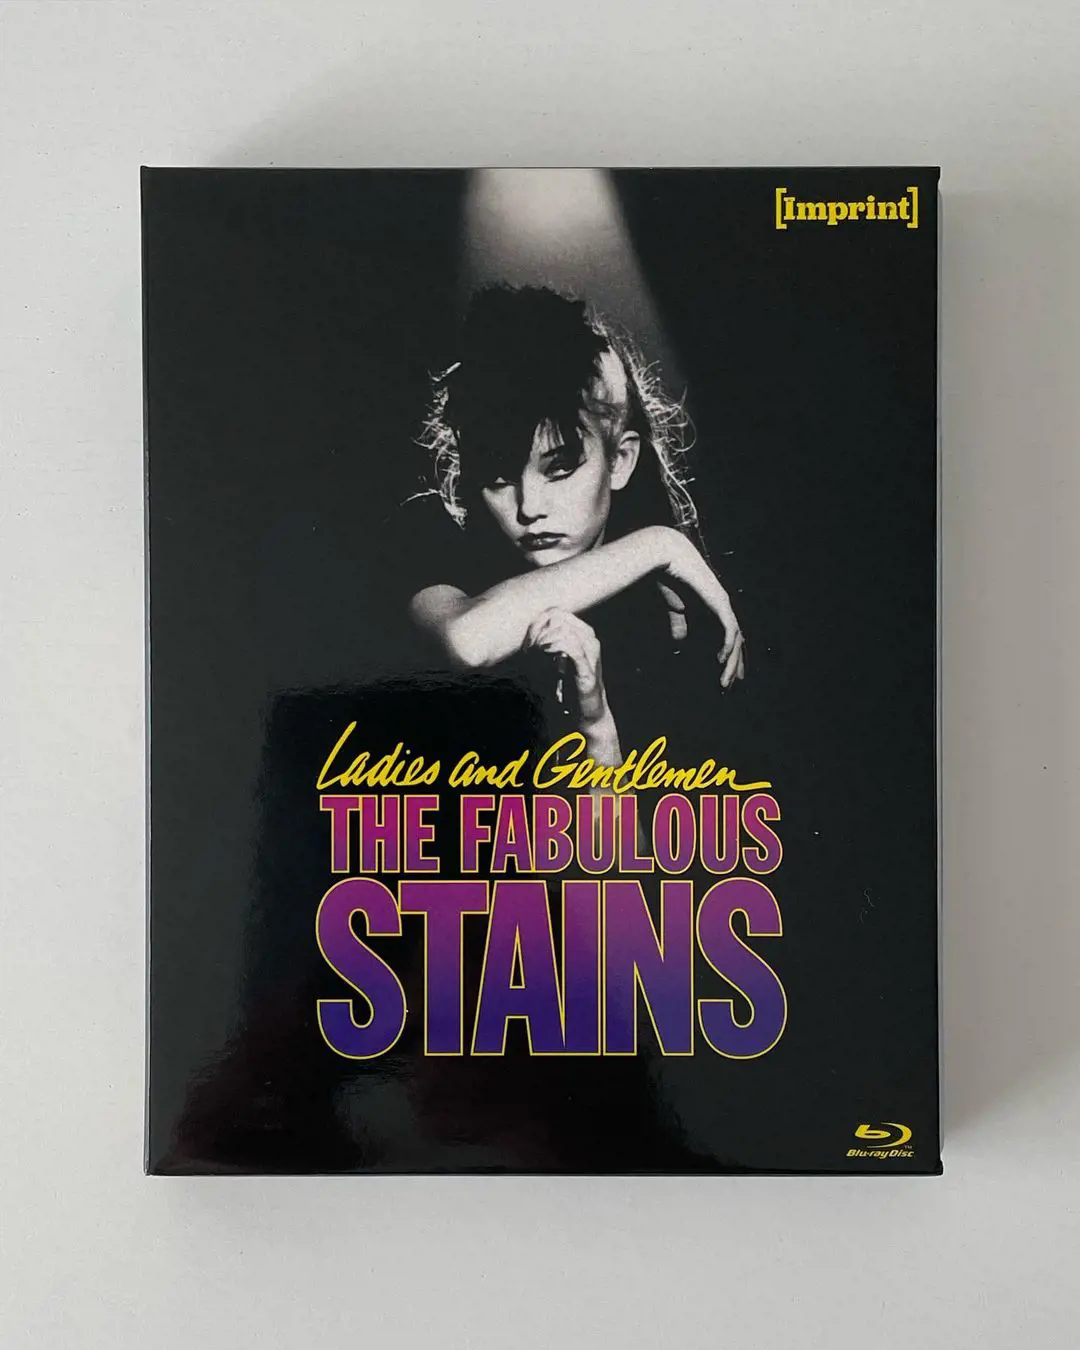 Ladies And Gentlemen The Fabulous Stains is one of the classic rock and roll movies